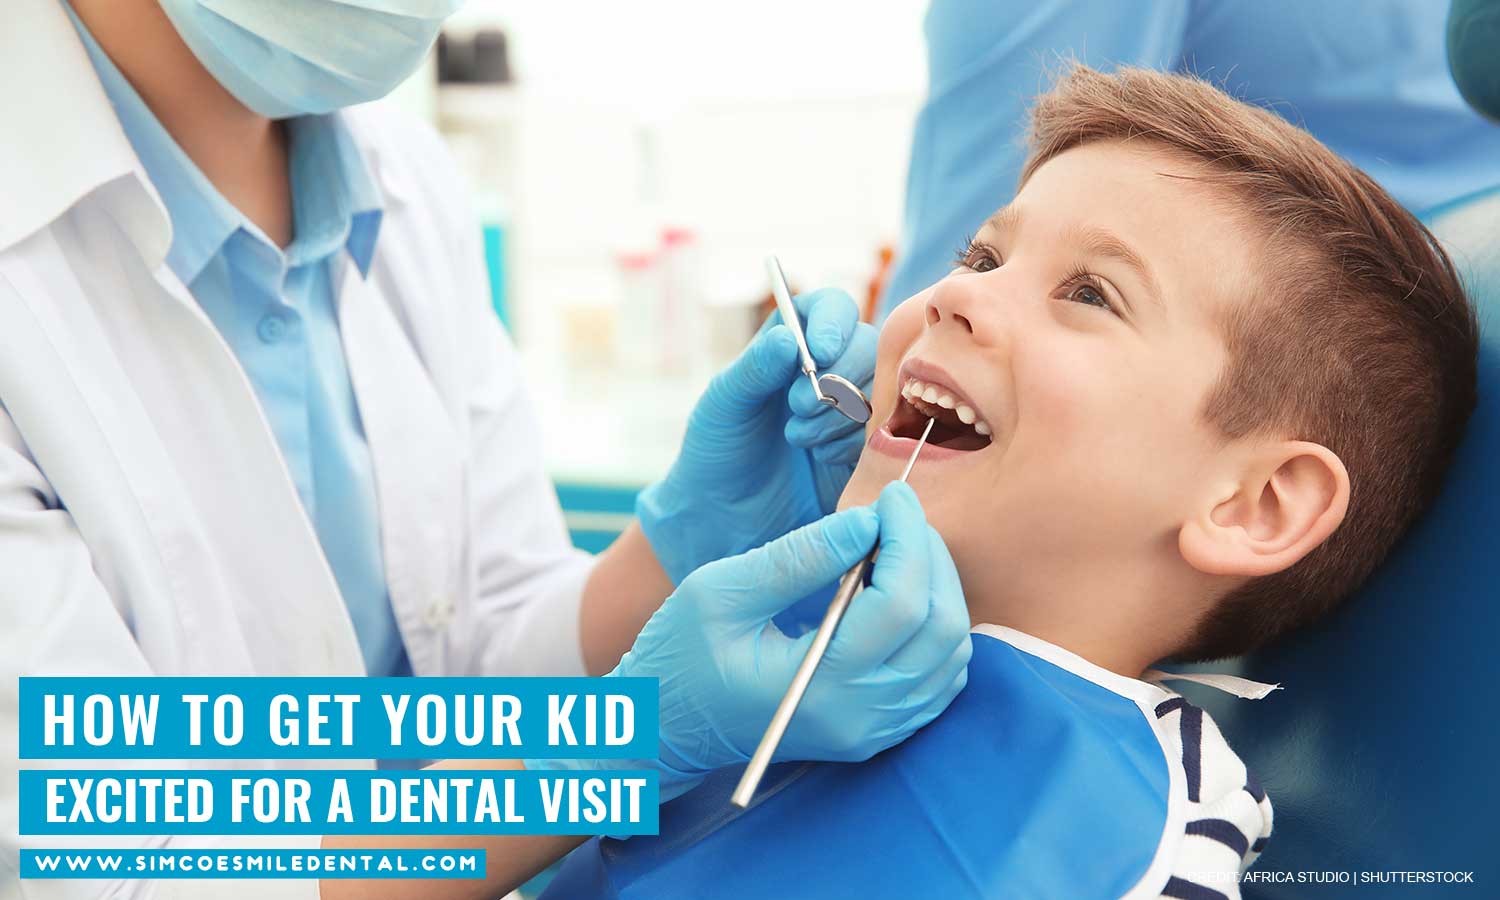 How to Get Your Kid Excited for a Dental Visit